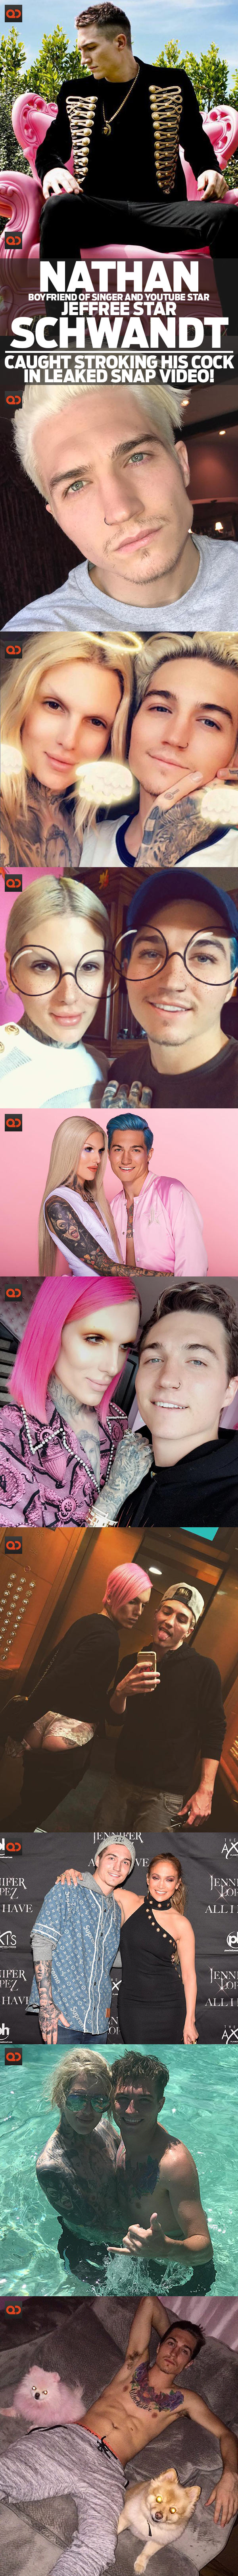 Nathan Schwandt, Boyfriend Of Singer And Youtube Star Jeffree Star, Caught Stroking His Cock In Leaked Snaps Video!